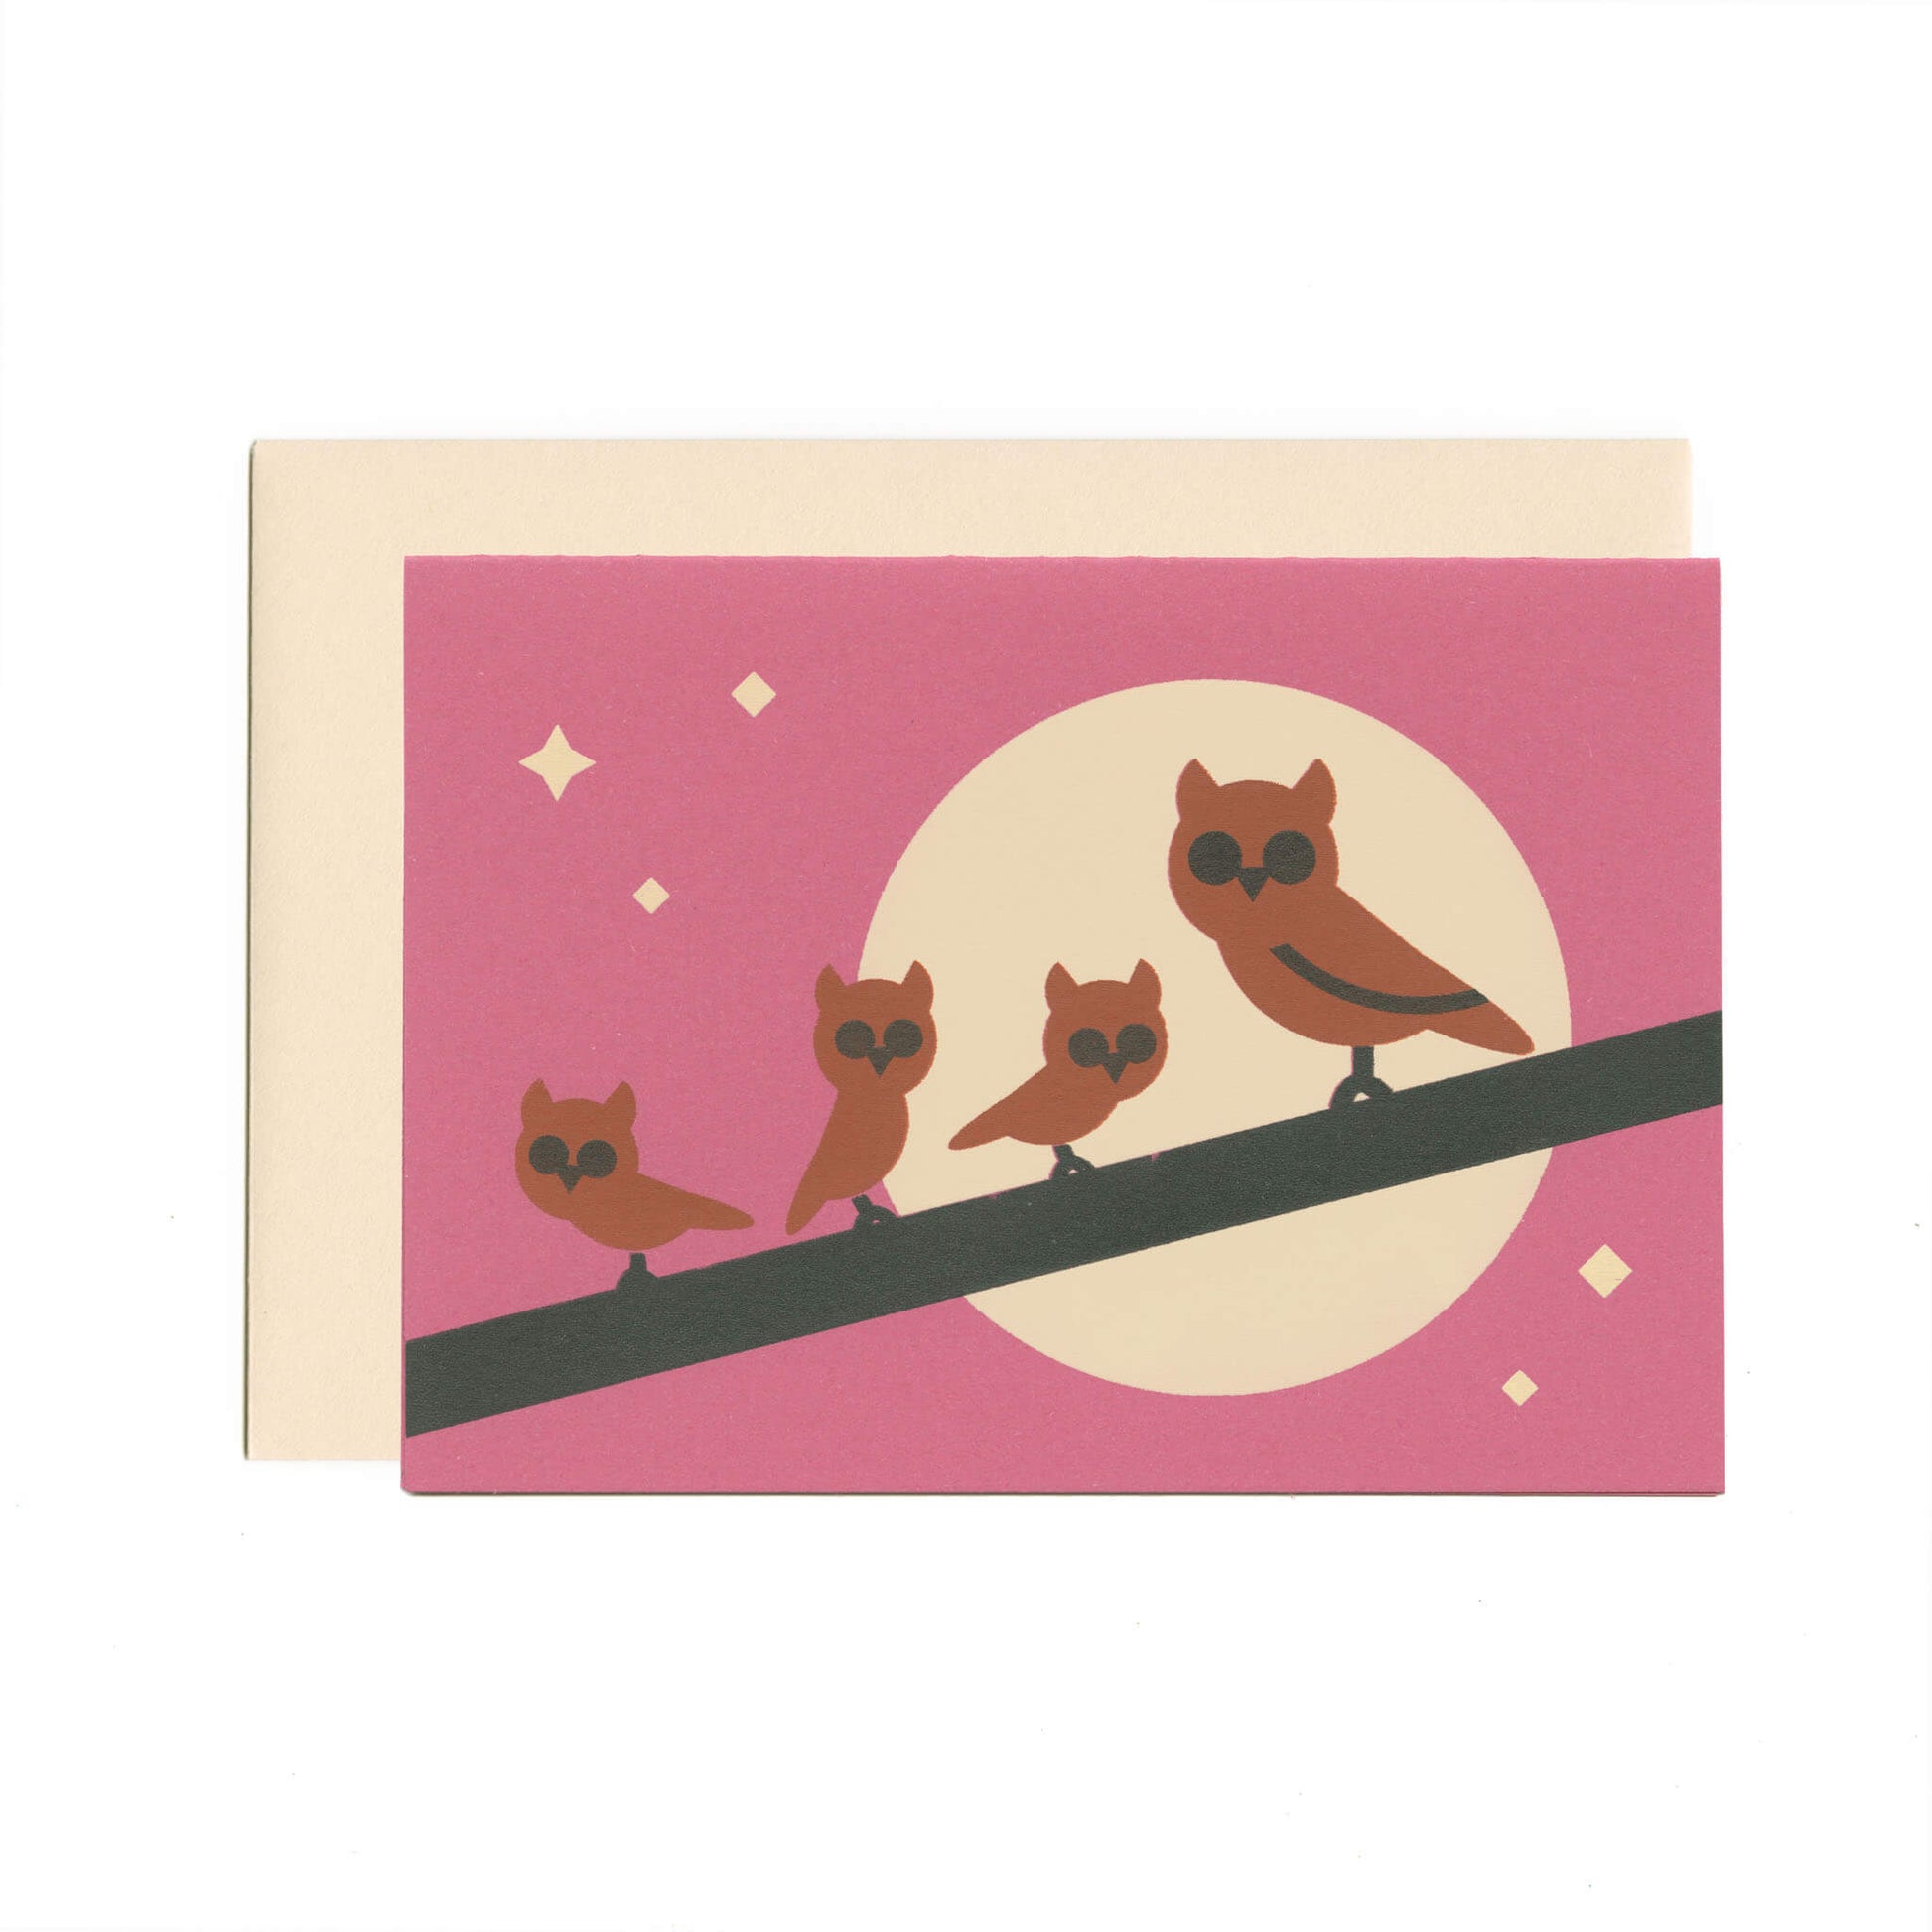 A purple greeting card featuring an illustration of one large and three small brown owls perched on a branch, with a moon and stars in the background. Beneath the card is a beige envelope.